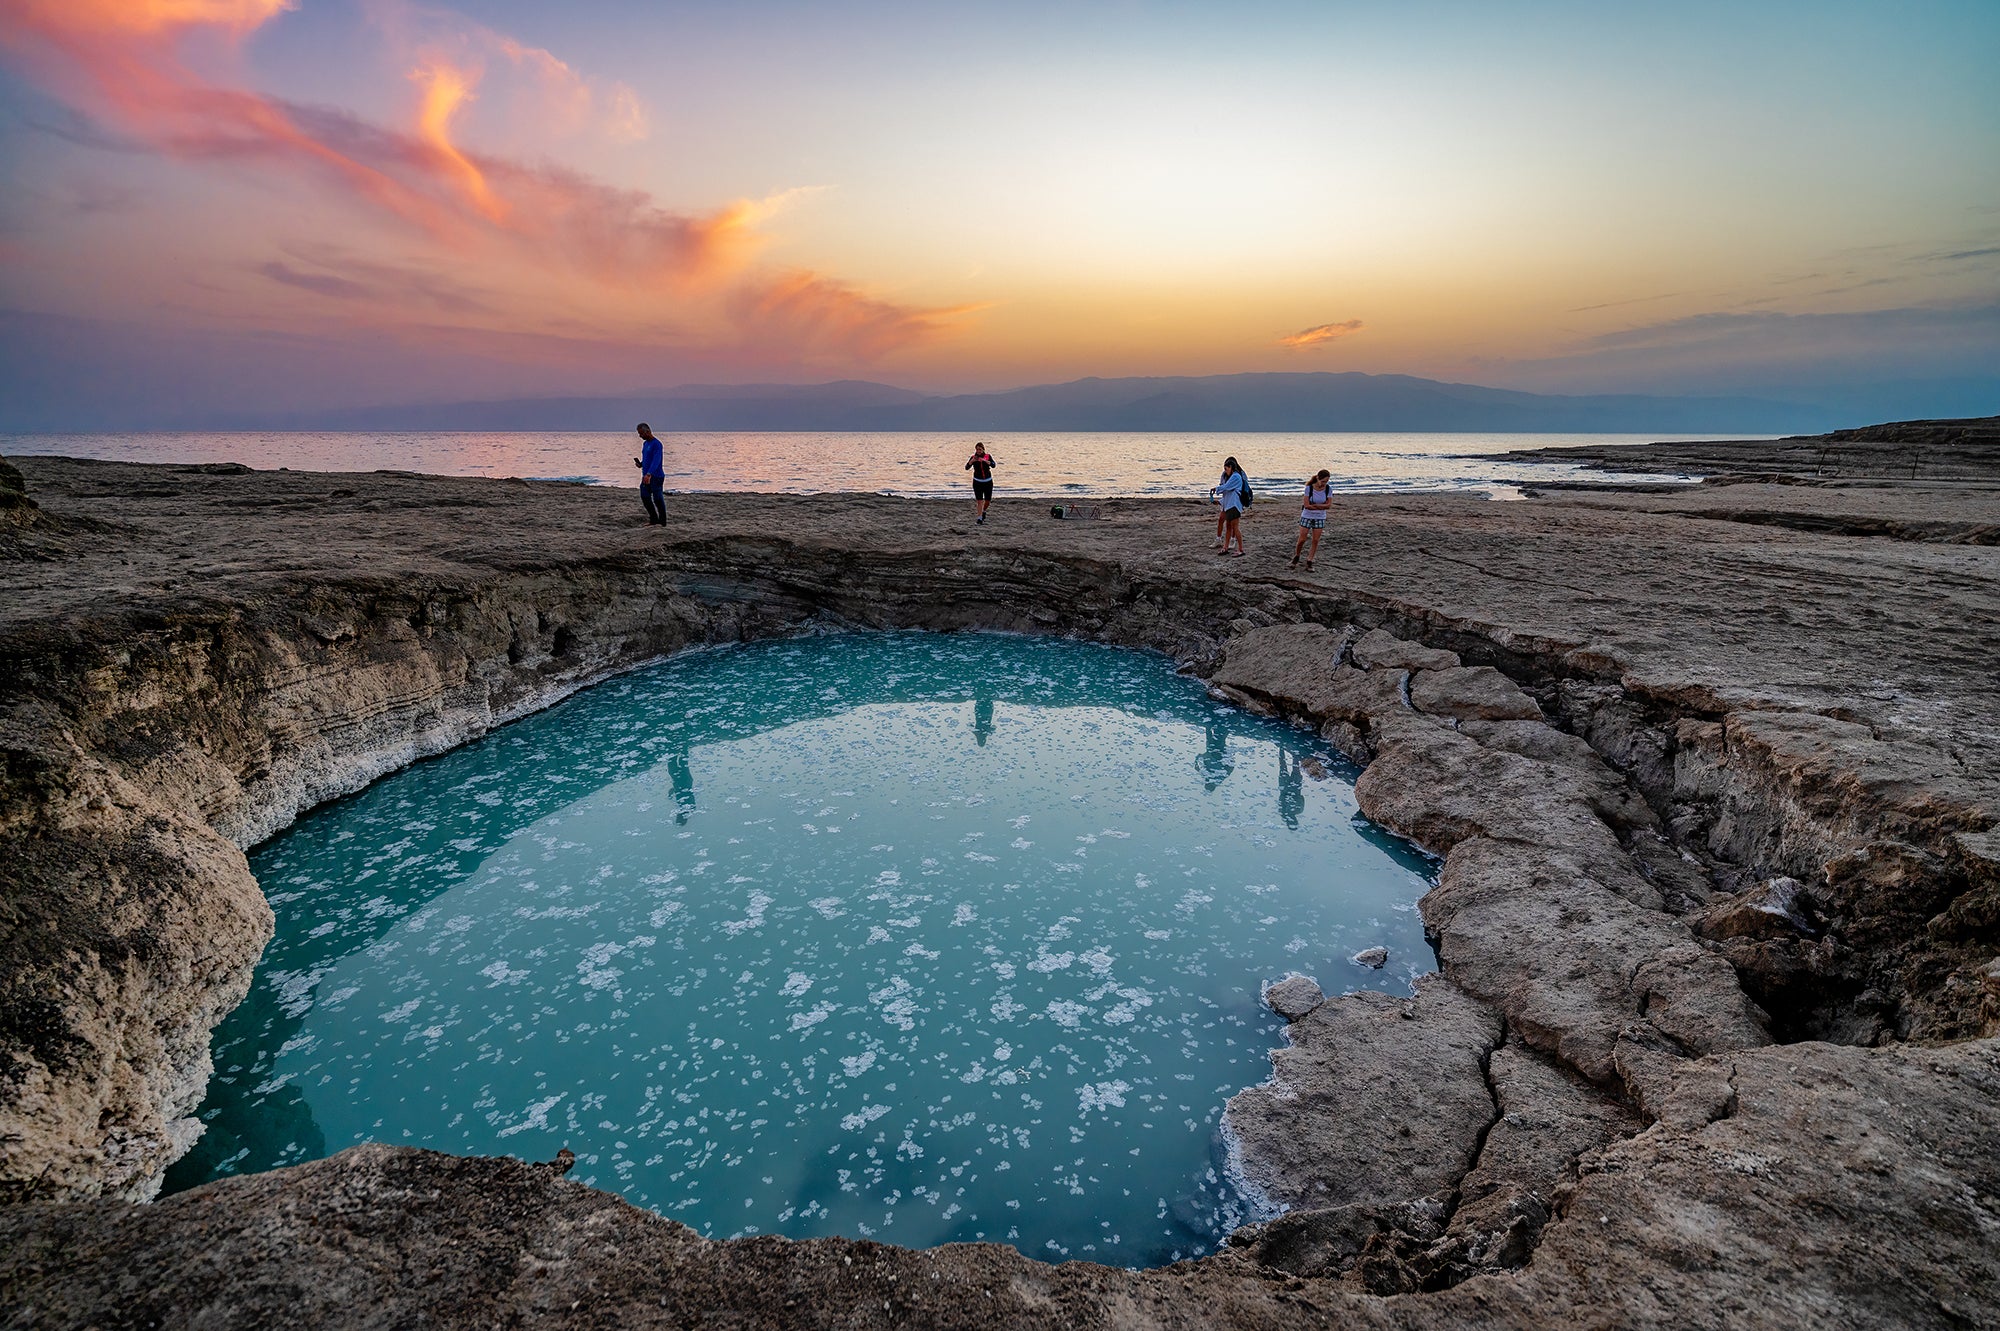 A journey to the land of sinkholes: immerse yourself in the wonders of nature